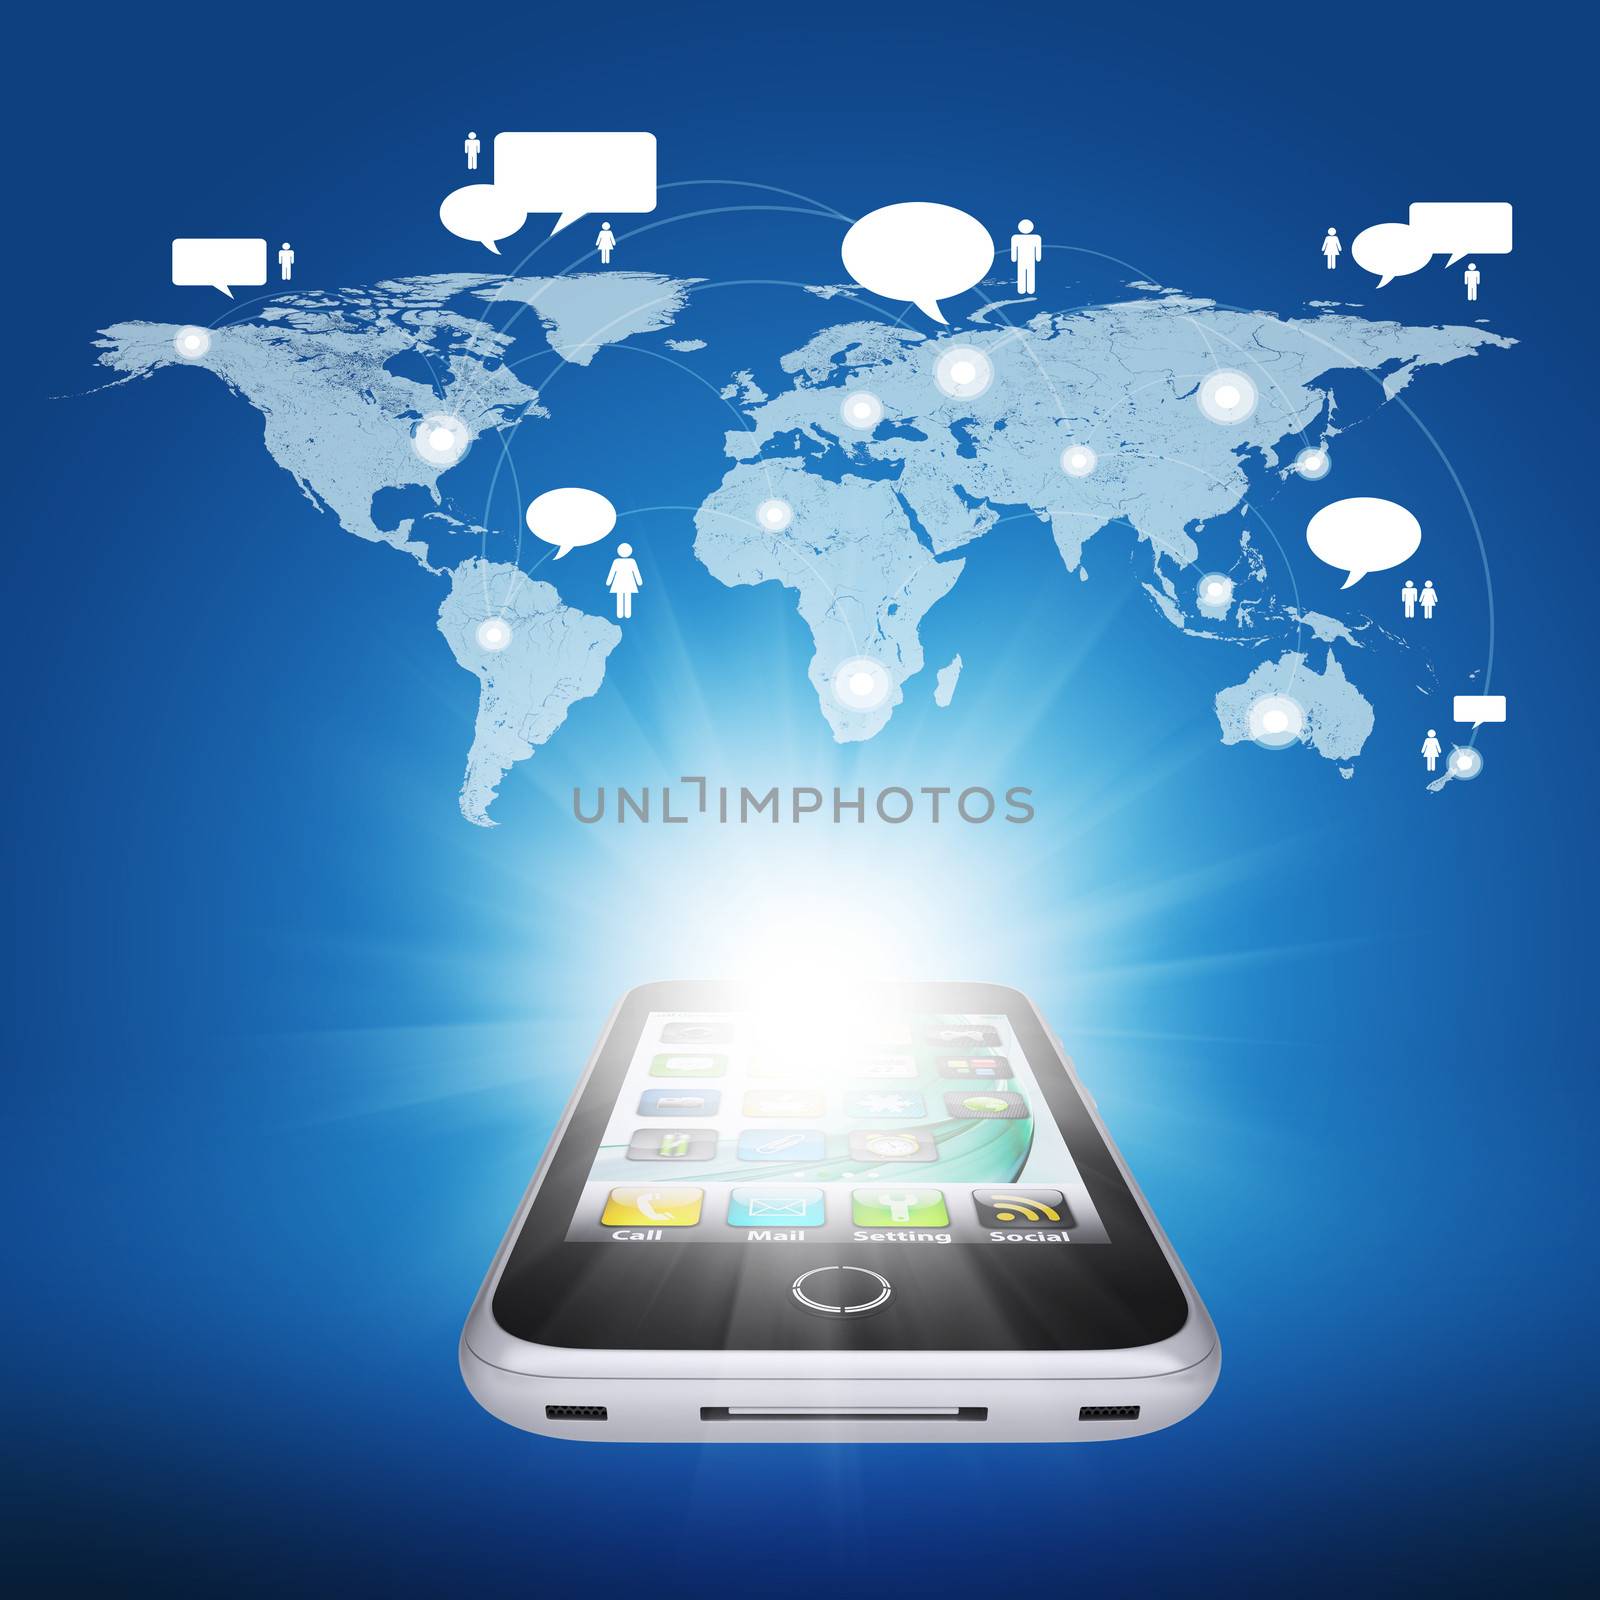 Smartphone and world map with contacts by cherezoff